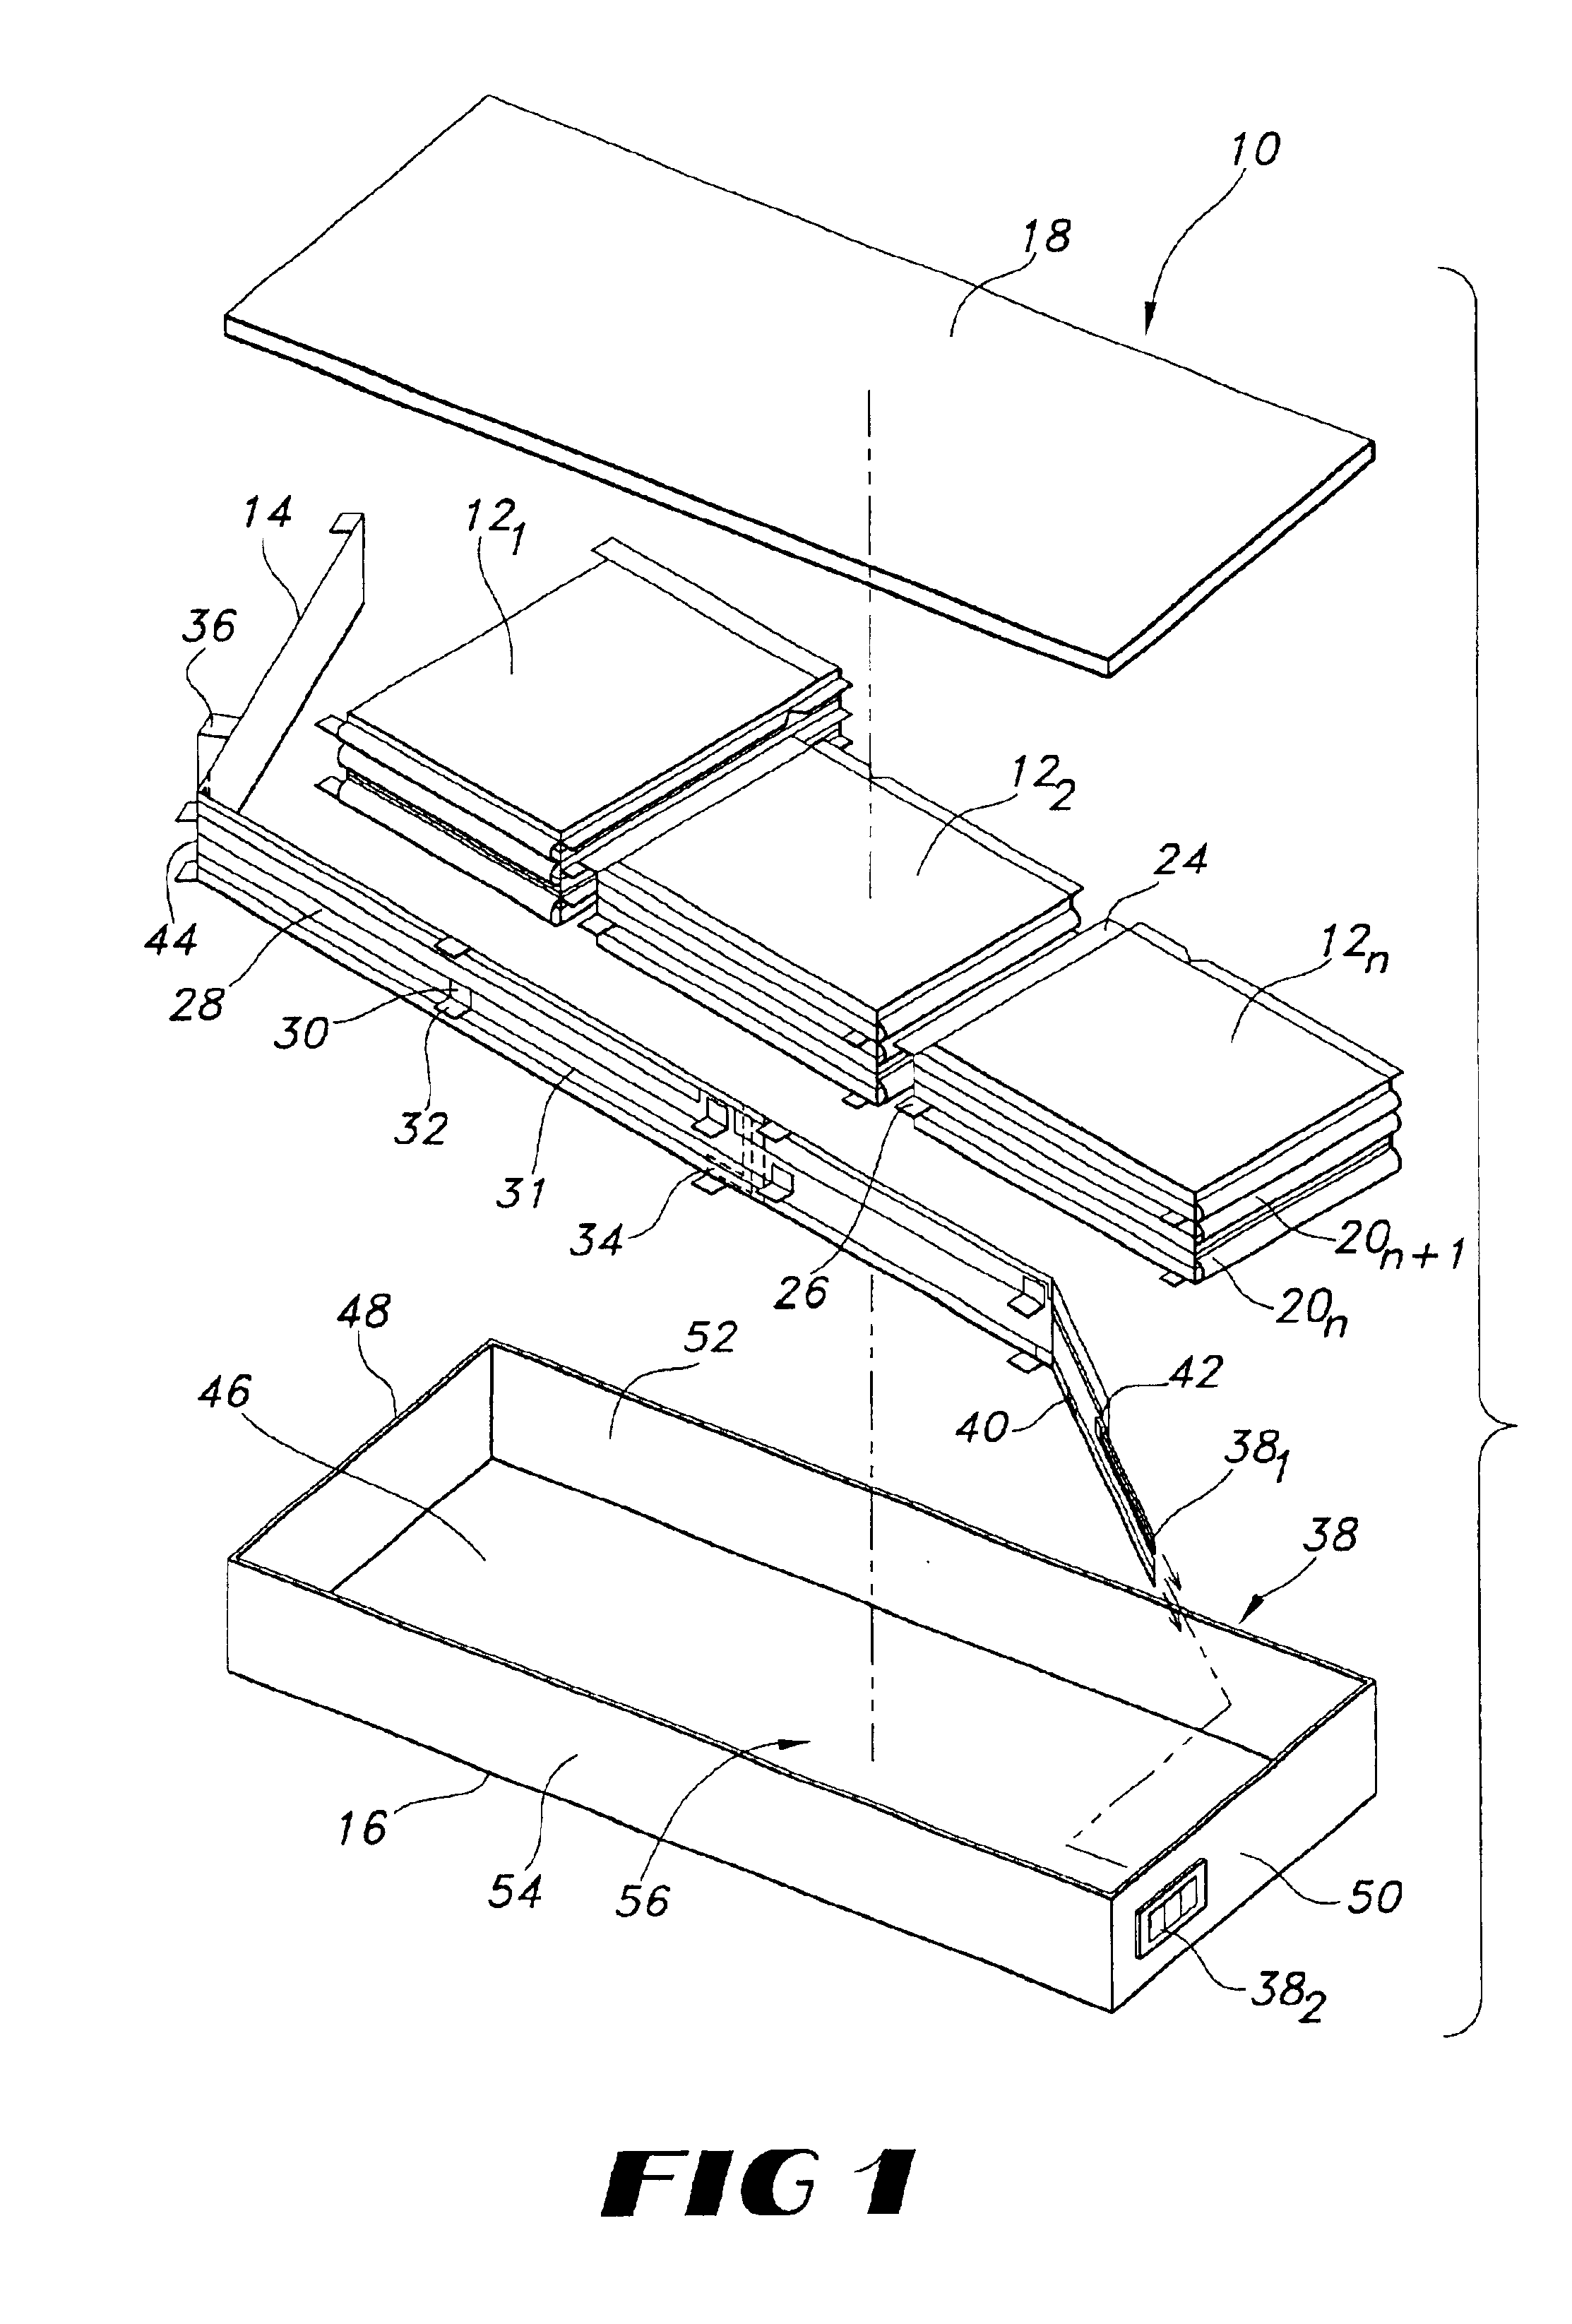 Battery pack having flexible circuit connector